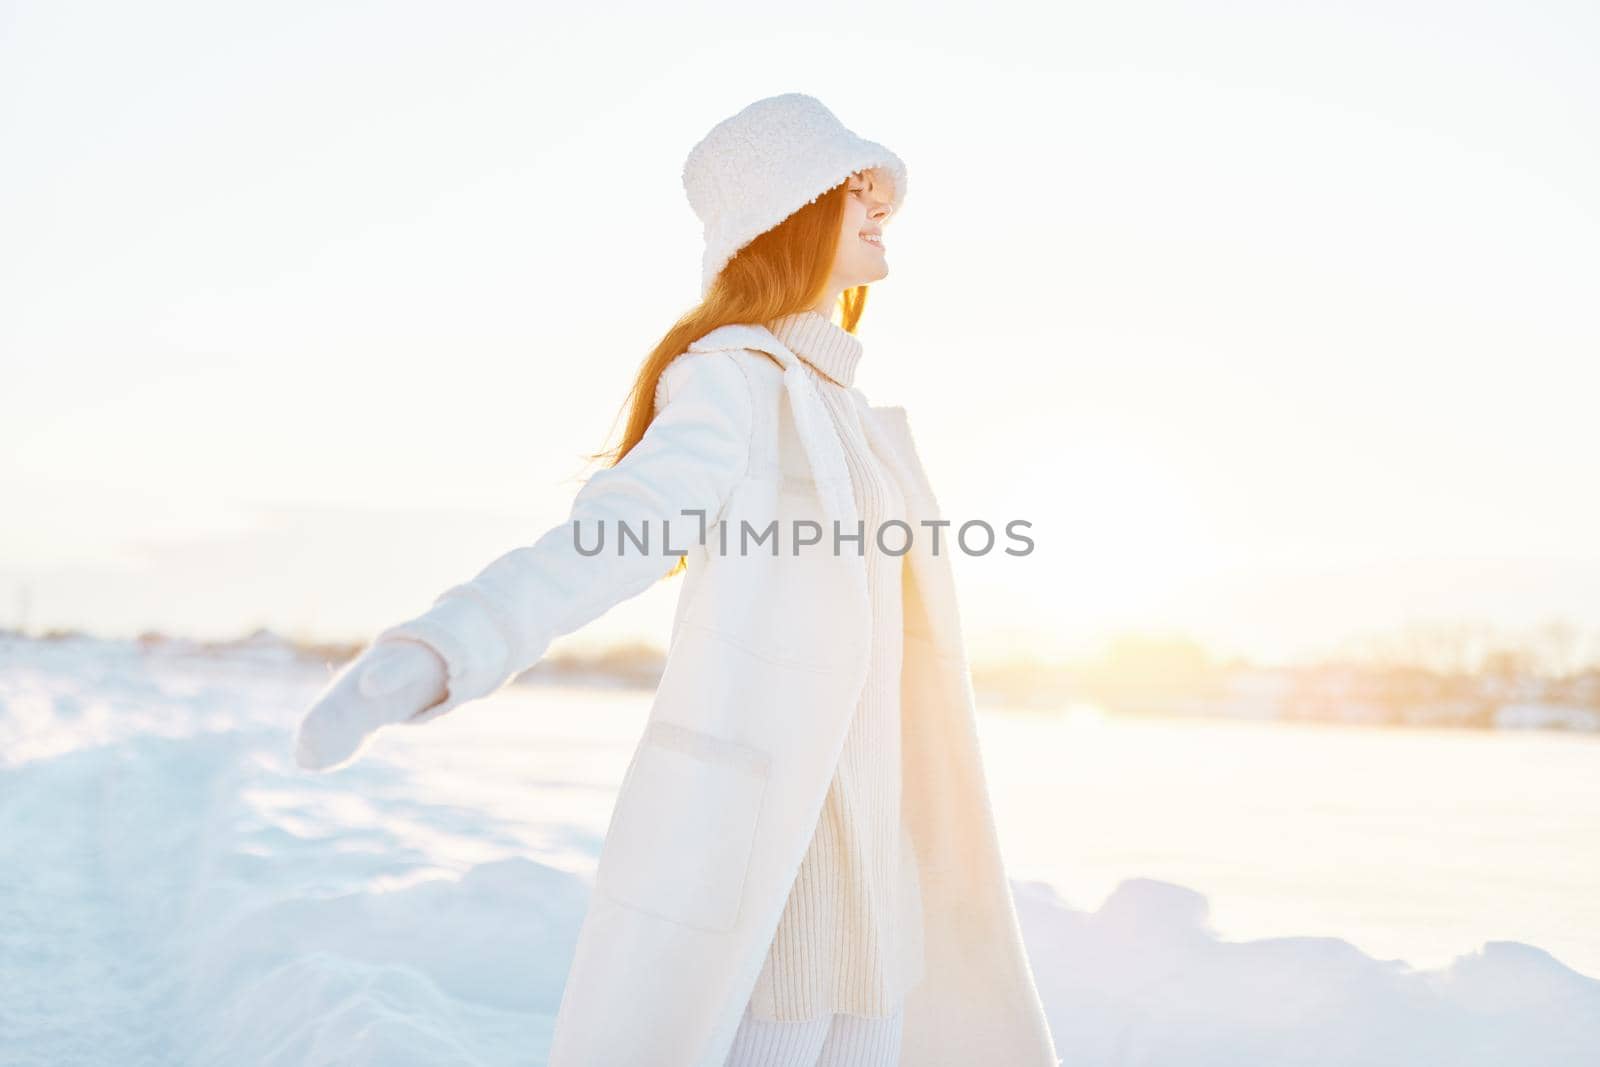 young woman winter clothes walk snow cold vacation Fresh air. High quality photo